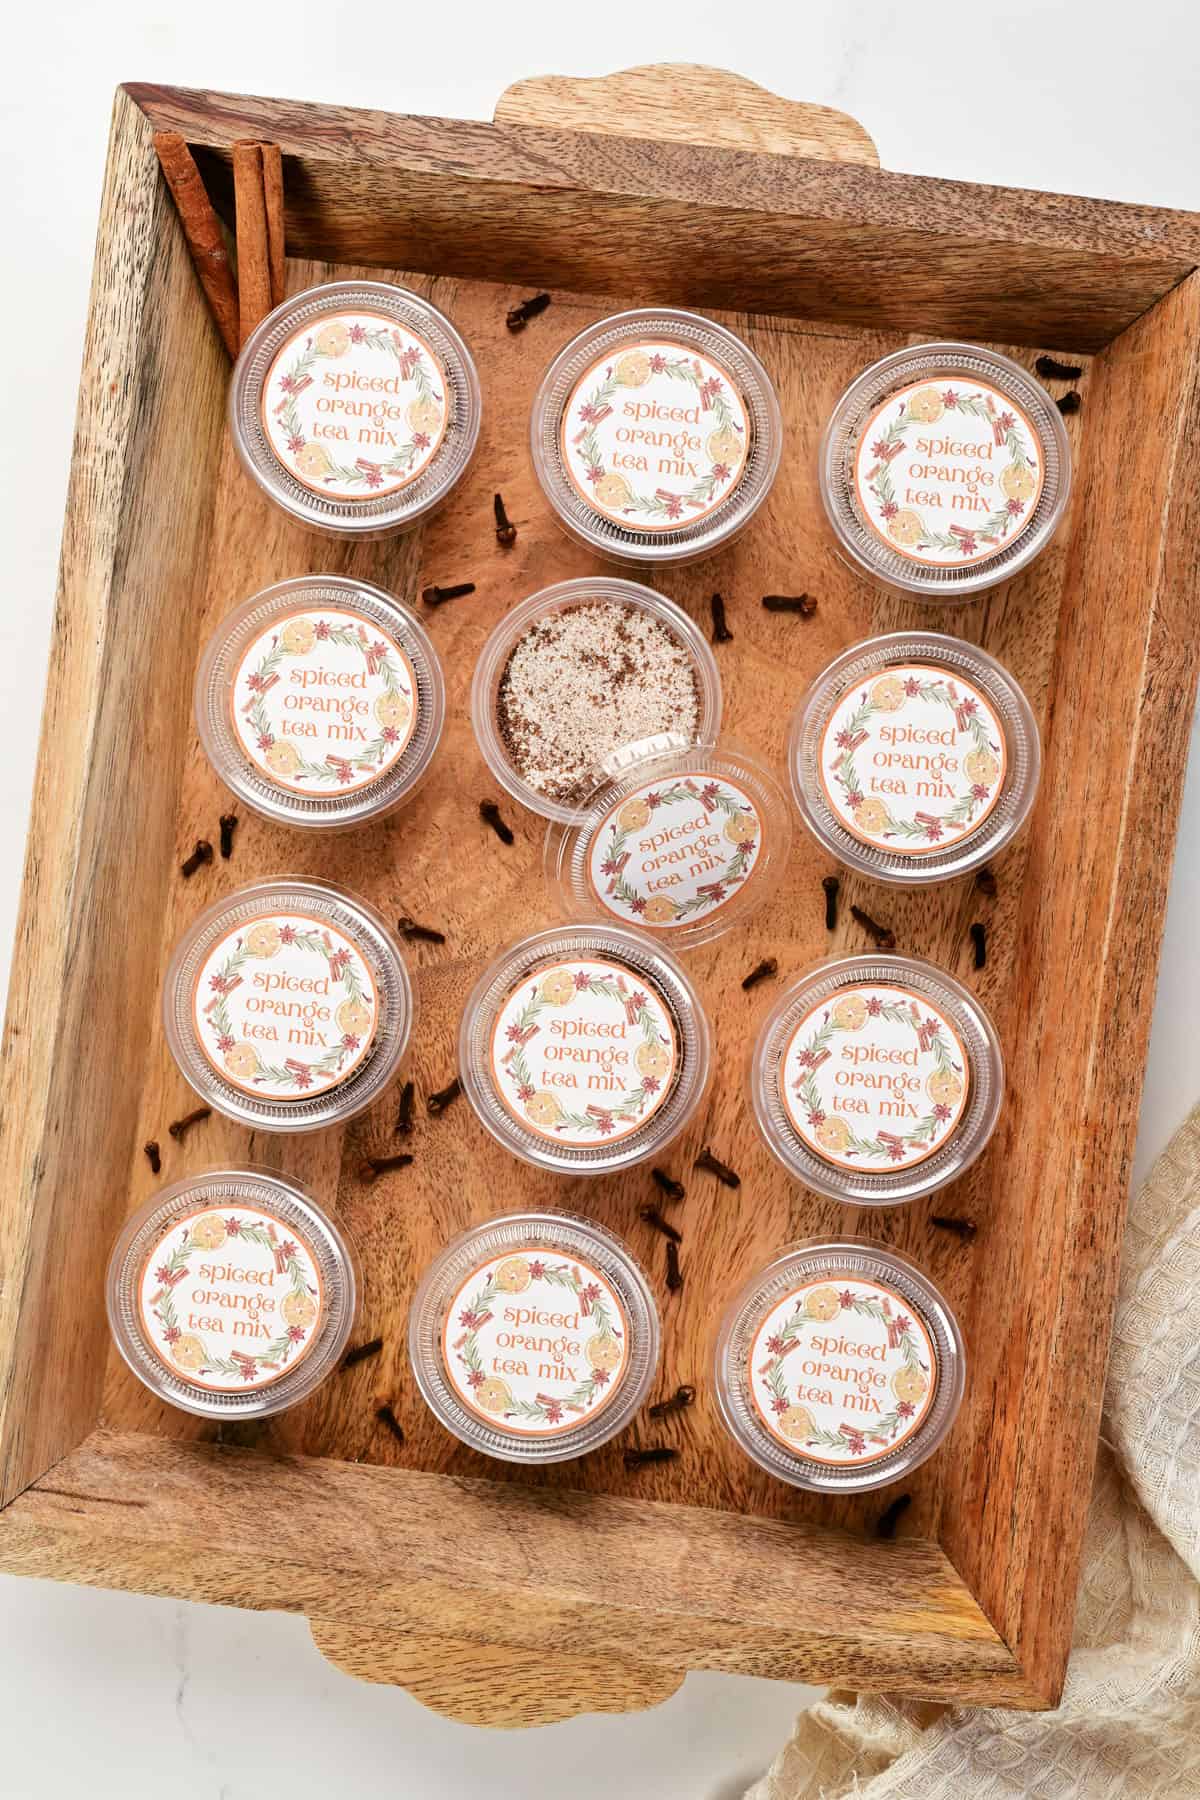 Spiced orange tea mix in containers in a wooden tray.